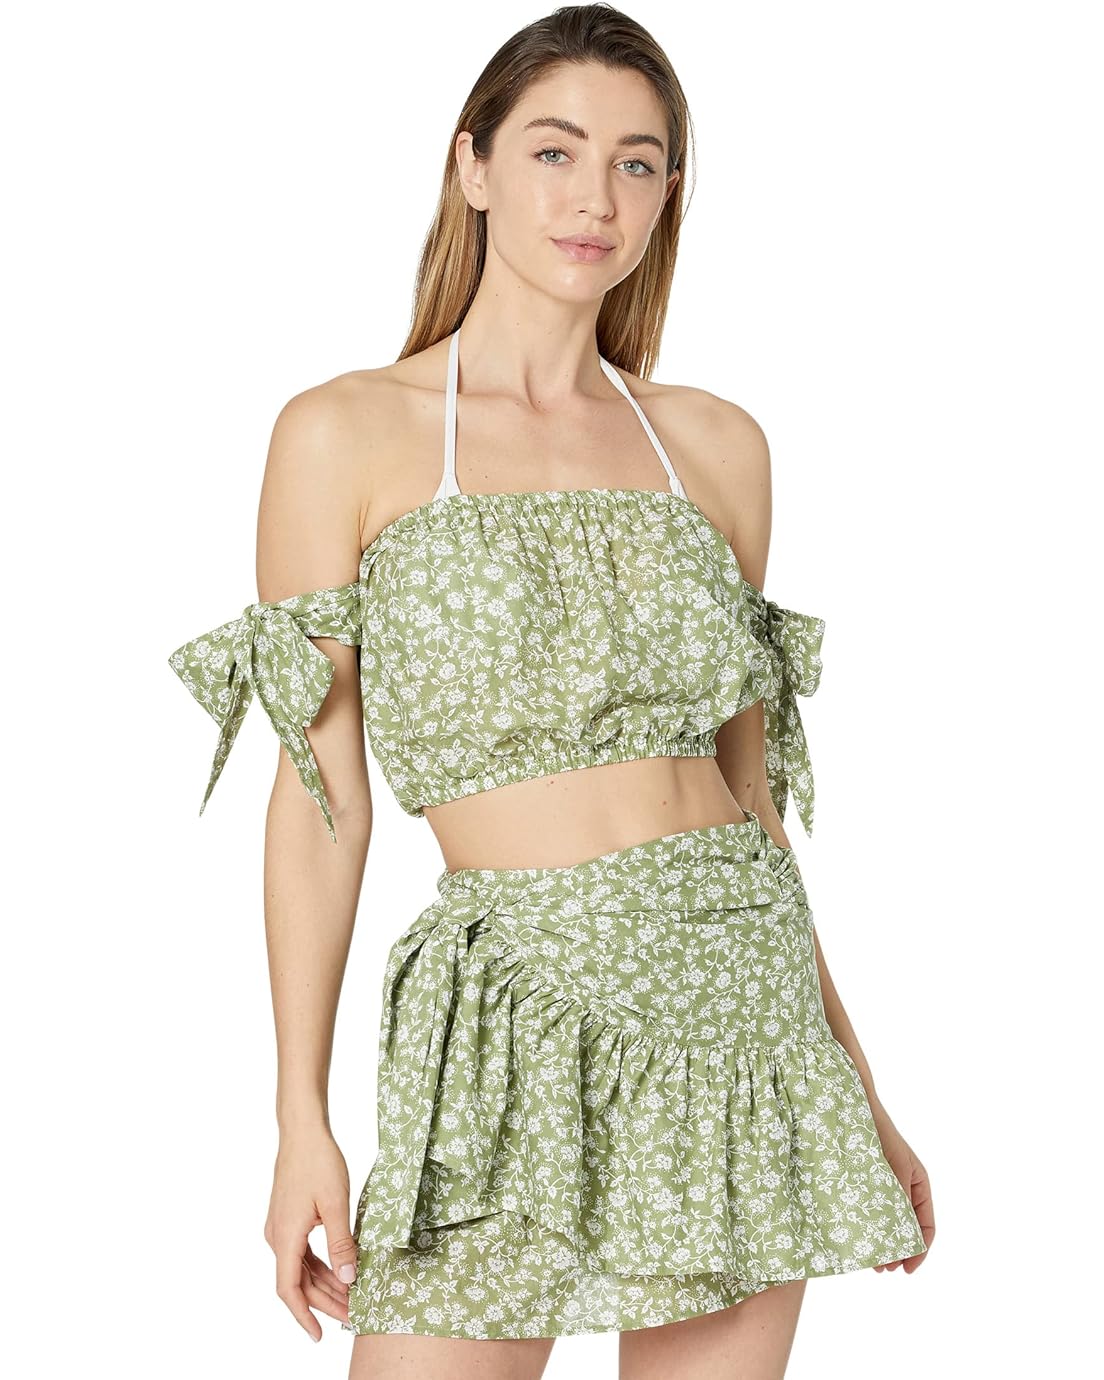 Eberjey Garden Andy Cover-Up